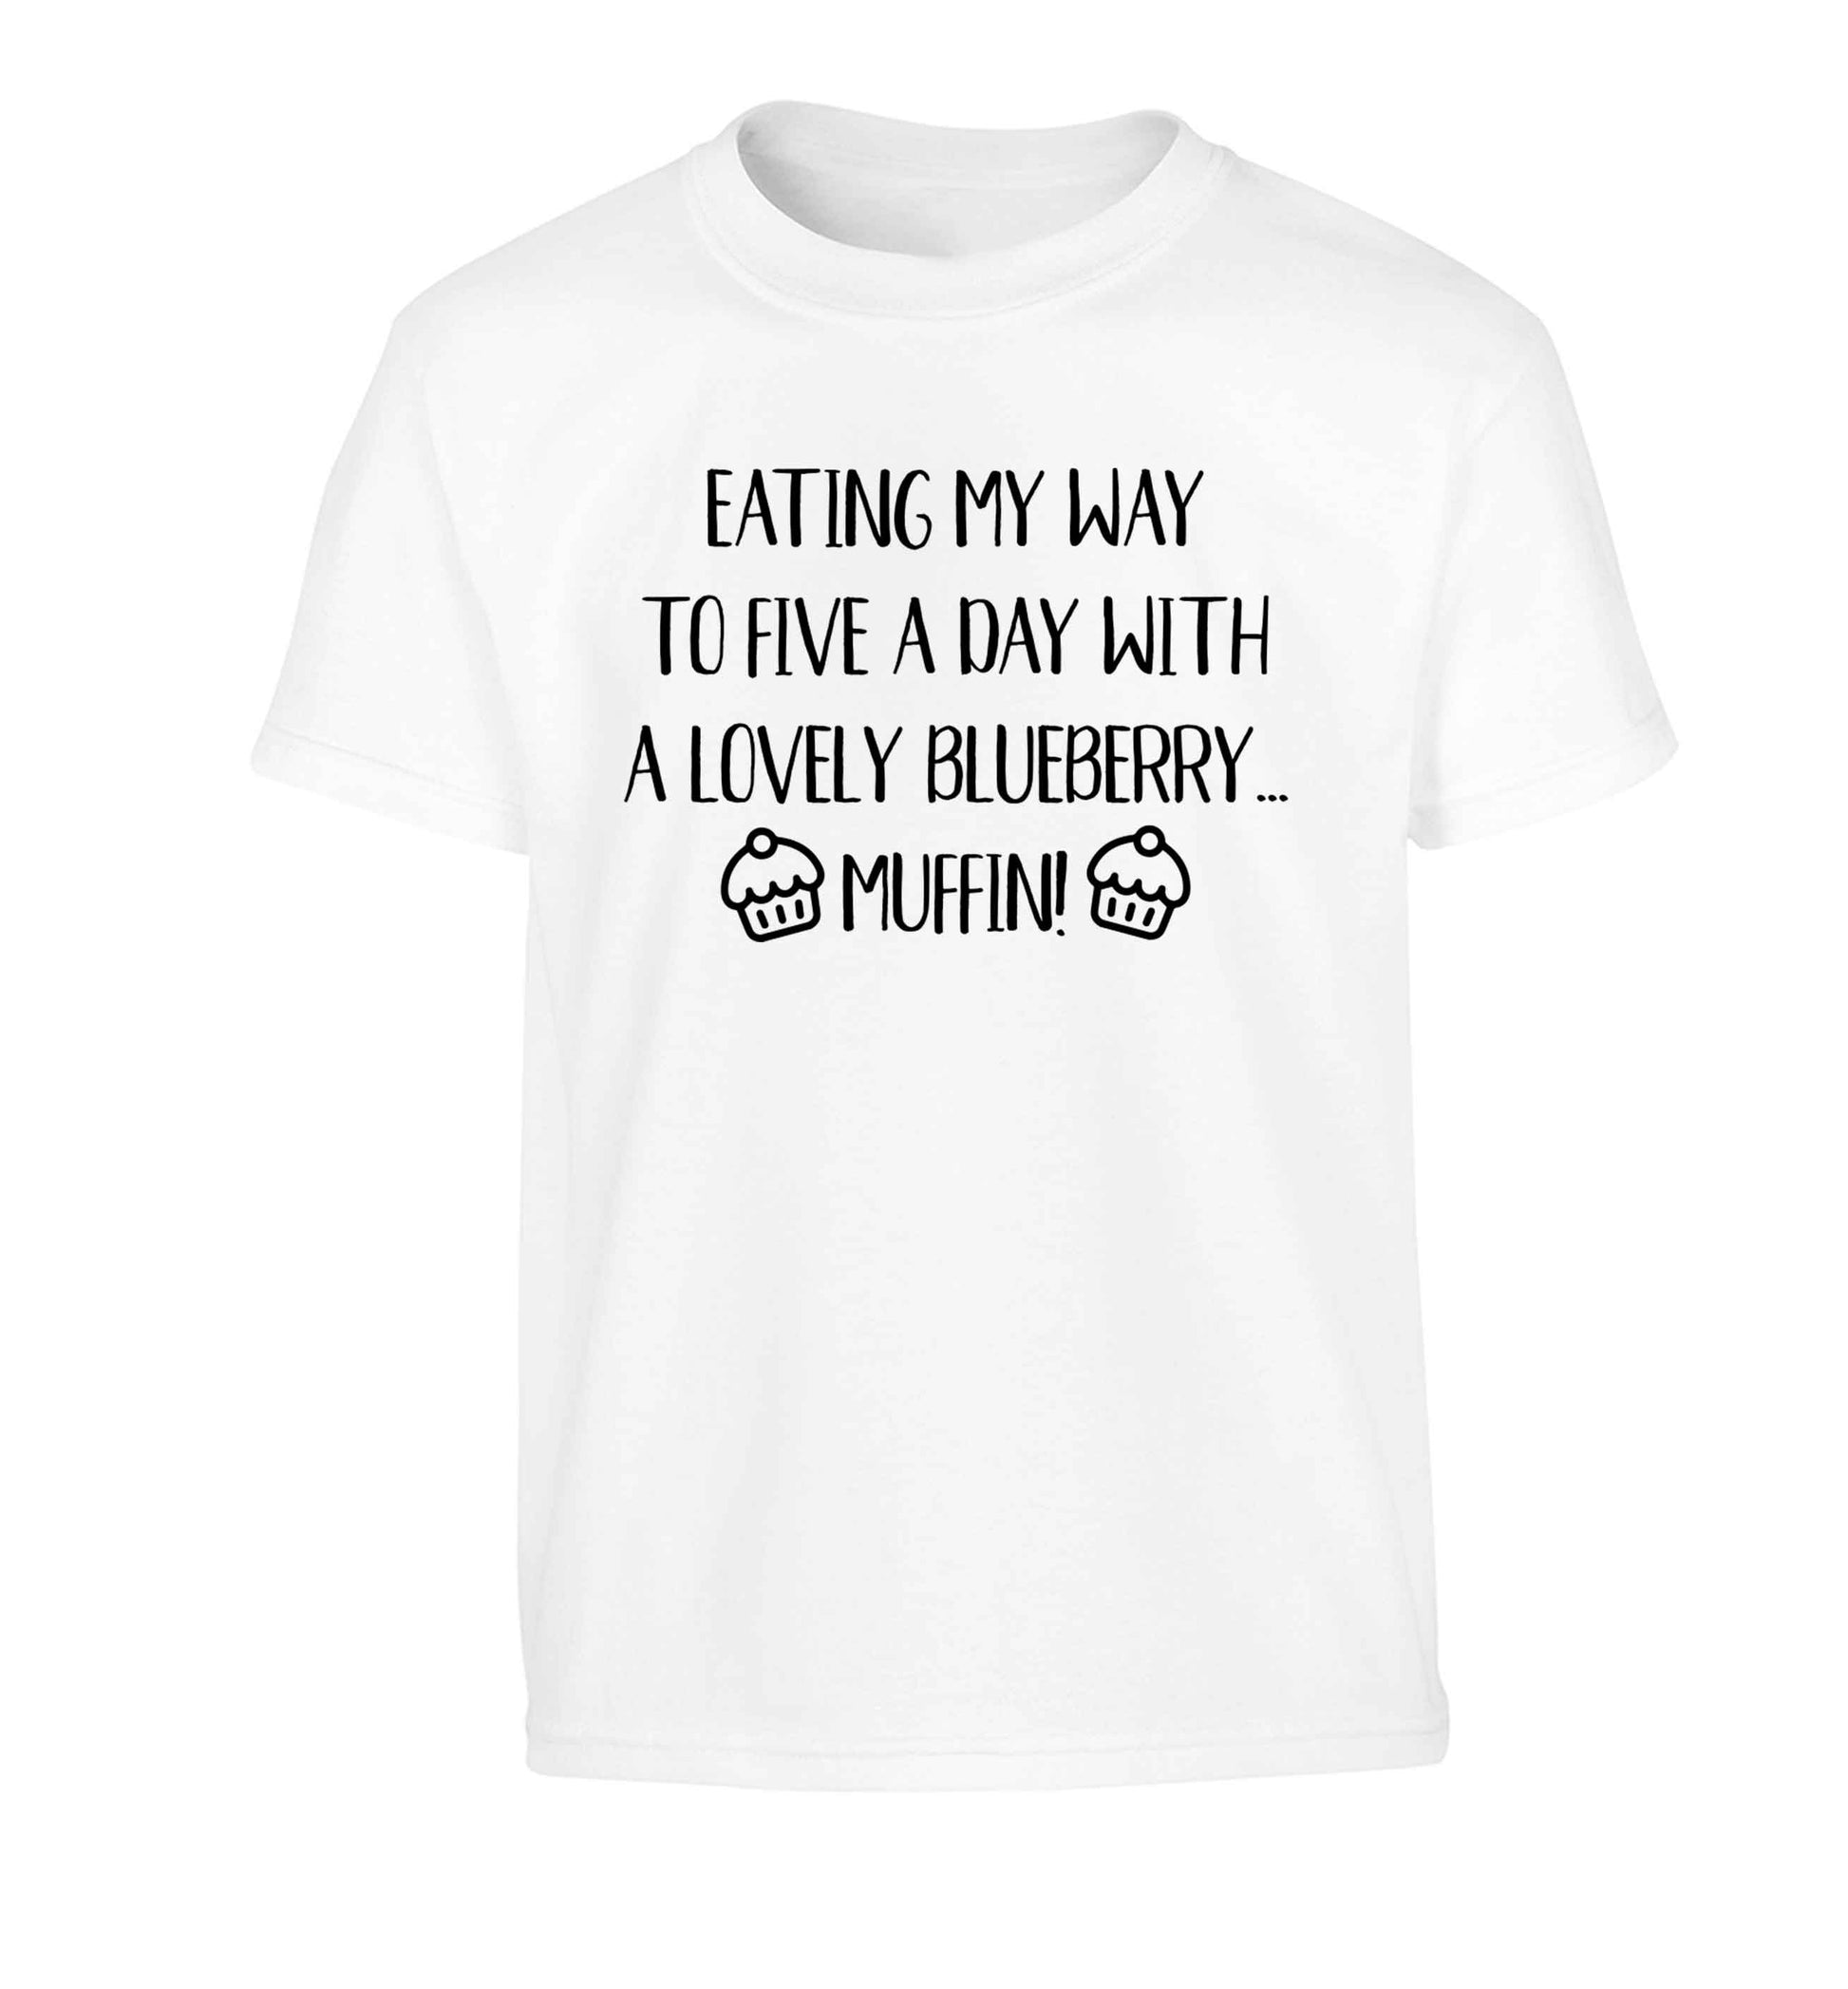 Eating my way to five a day with a lovely blueberry muffin Children's white Tshirt 12-13 Years